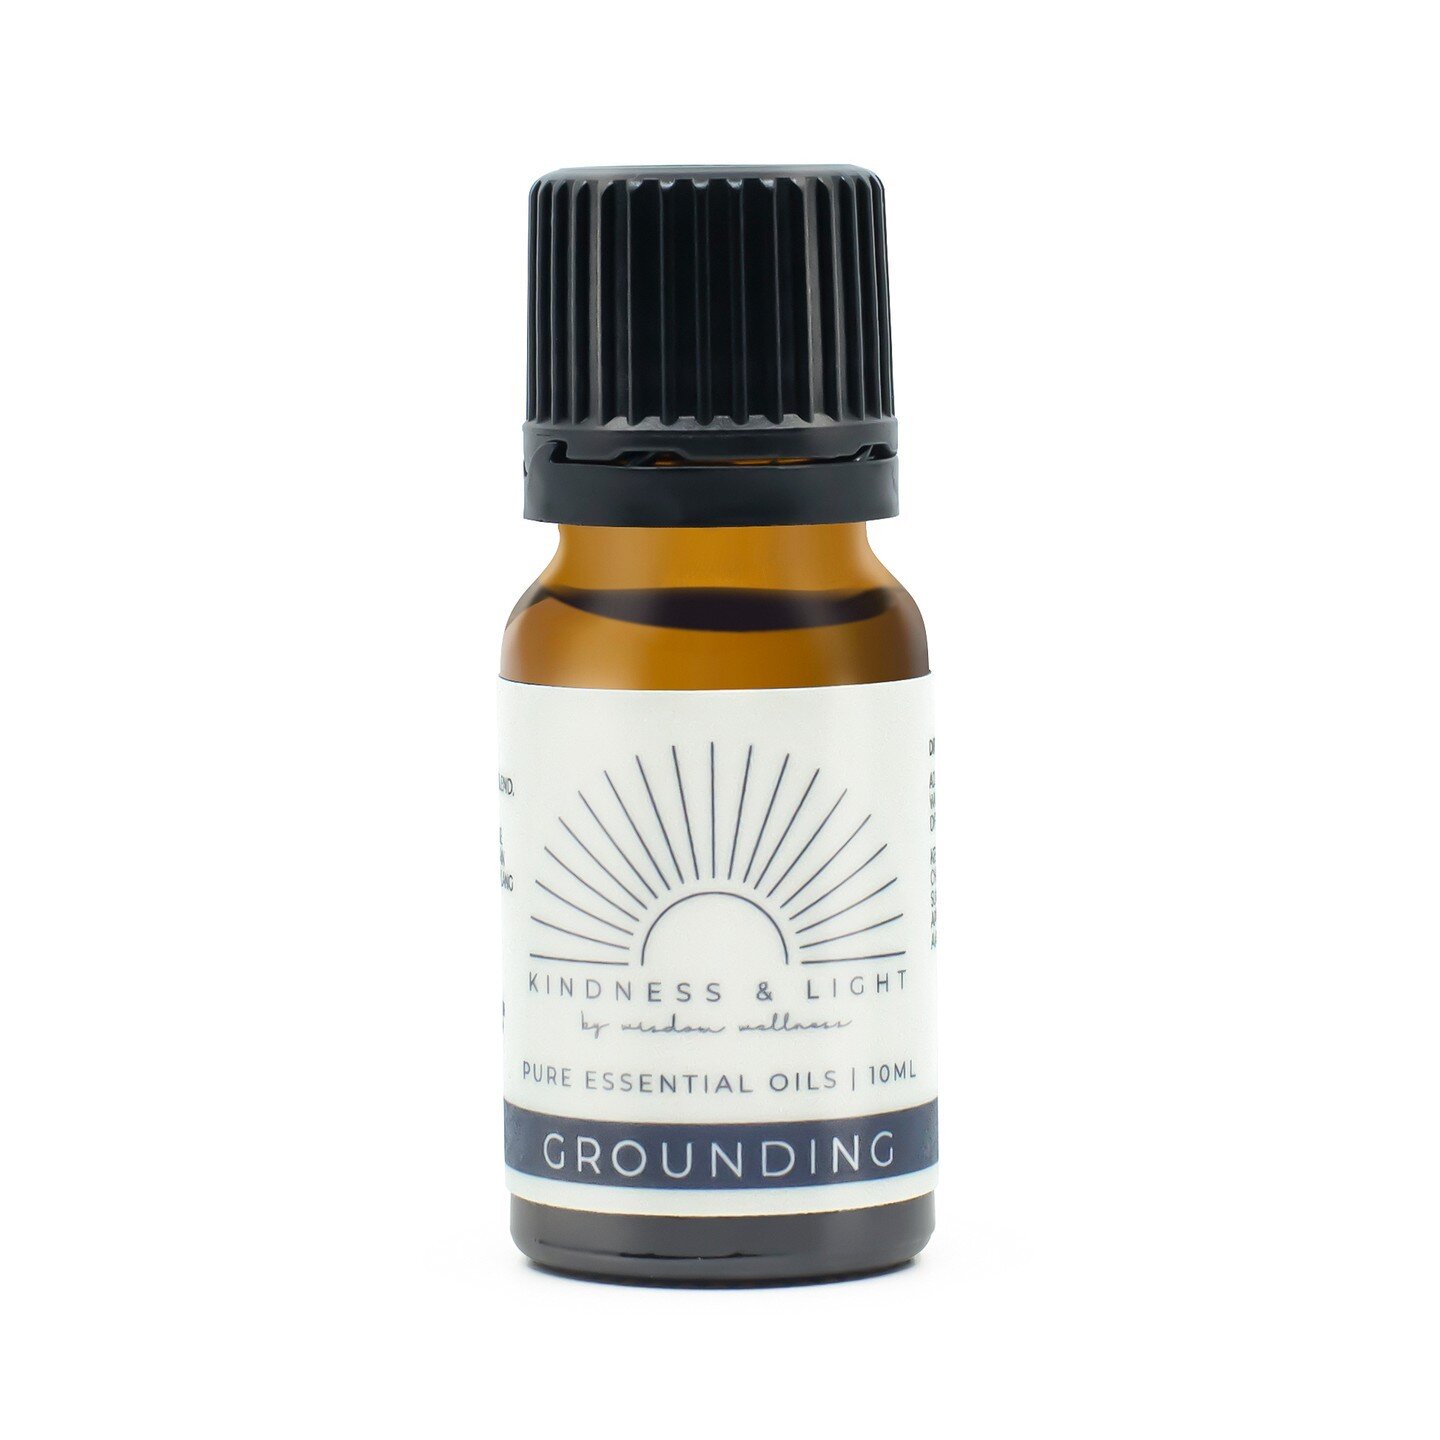 GROUNDING ESSENTIAL OIL ➖ 

Our grounding pure essential oil to add to your favourite diffuser. A synergistic blend created with love to balance whilst nurturing a sense of ease, harmony, comfort and connection to self. The blend has an anchoring way